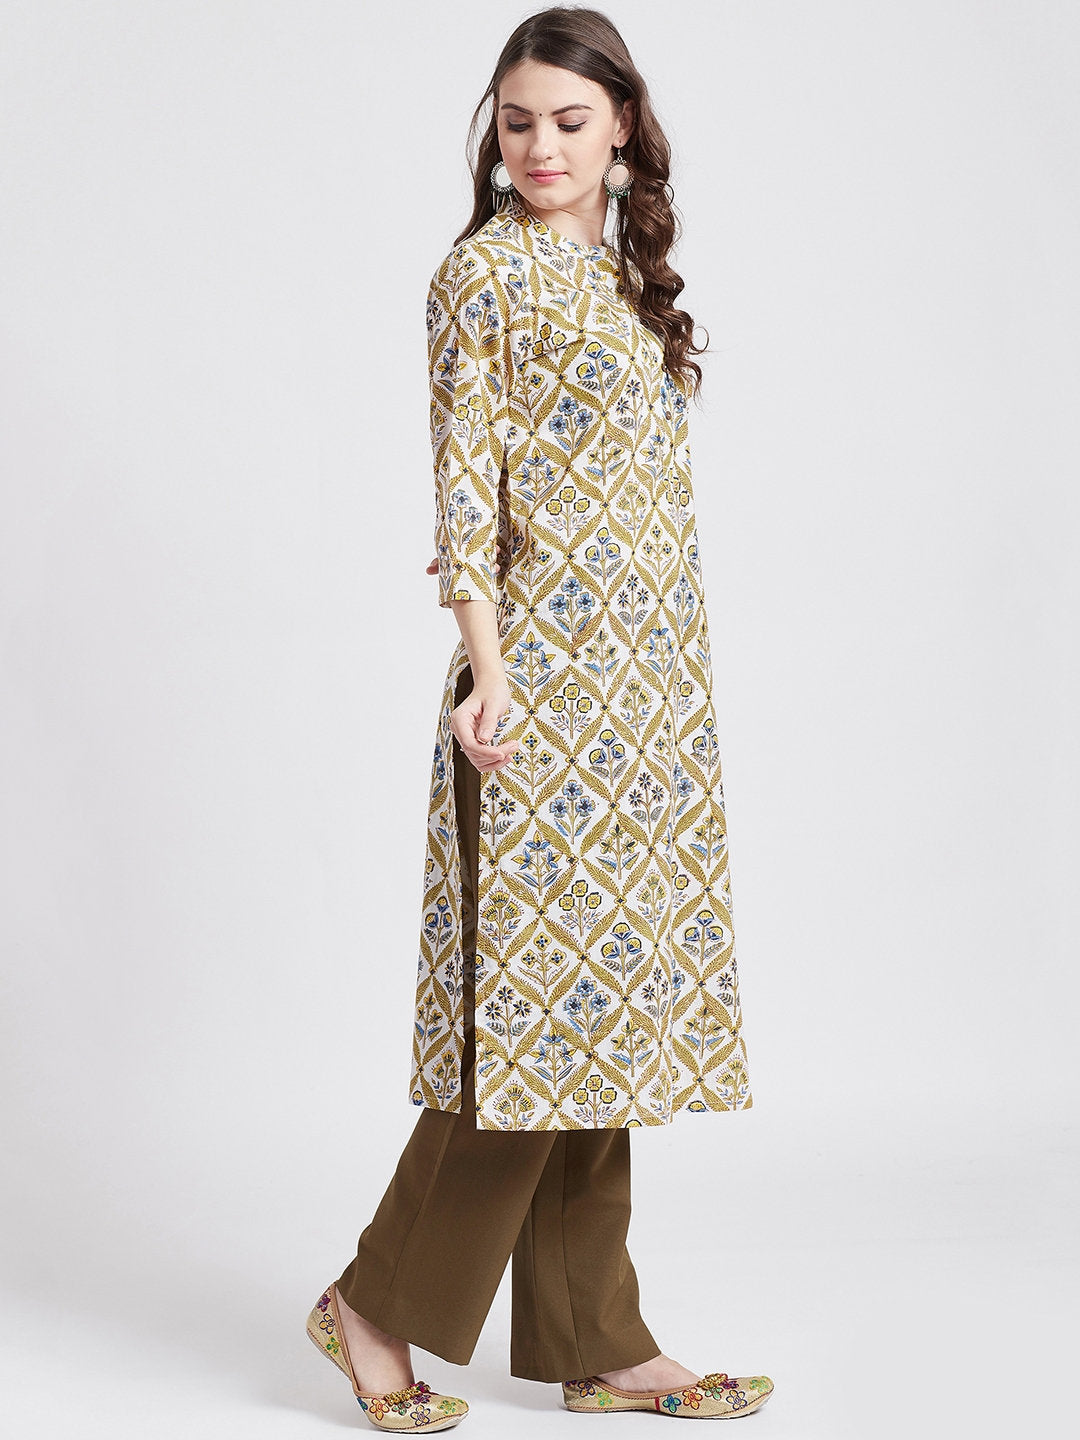 Hand block printed ethnic long Indian kurta with front button placket